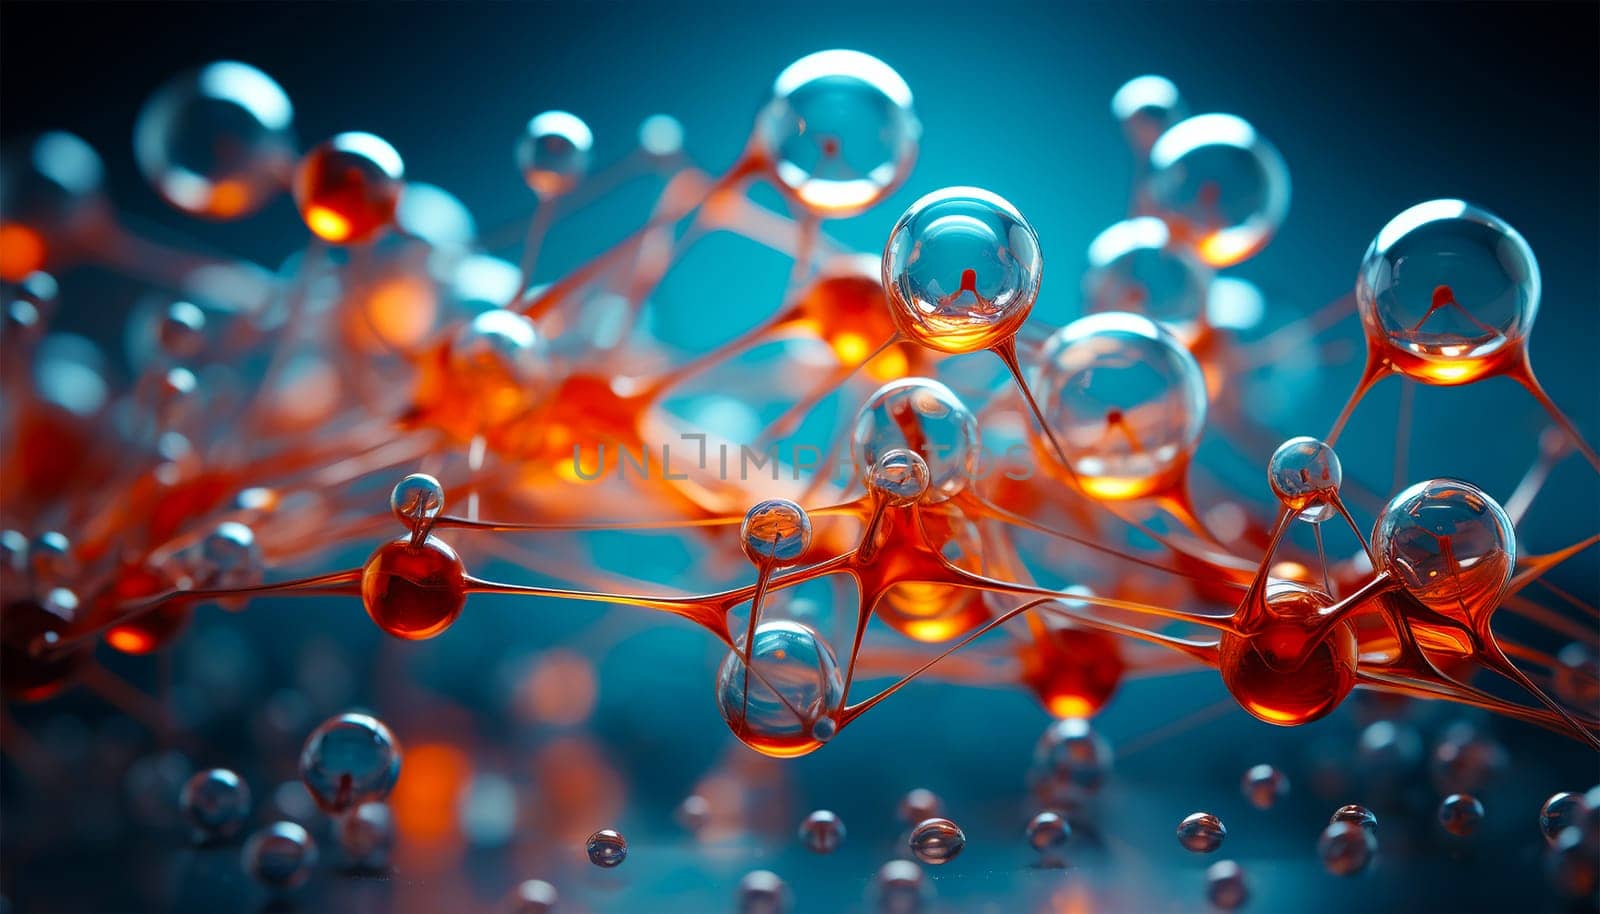 Science background with molecule or atom. molecule set, jojoba nano 3D cell, collagen bio abstract medical icon. Beauty science skin care molecular concept, natural bubble kit. colorful molecule atom illustration by Annebel146